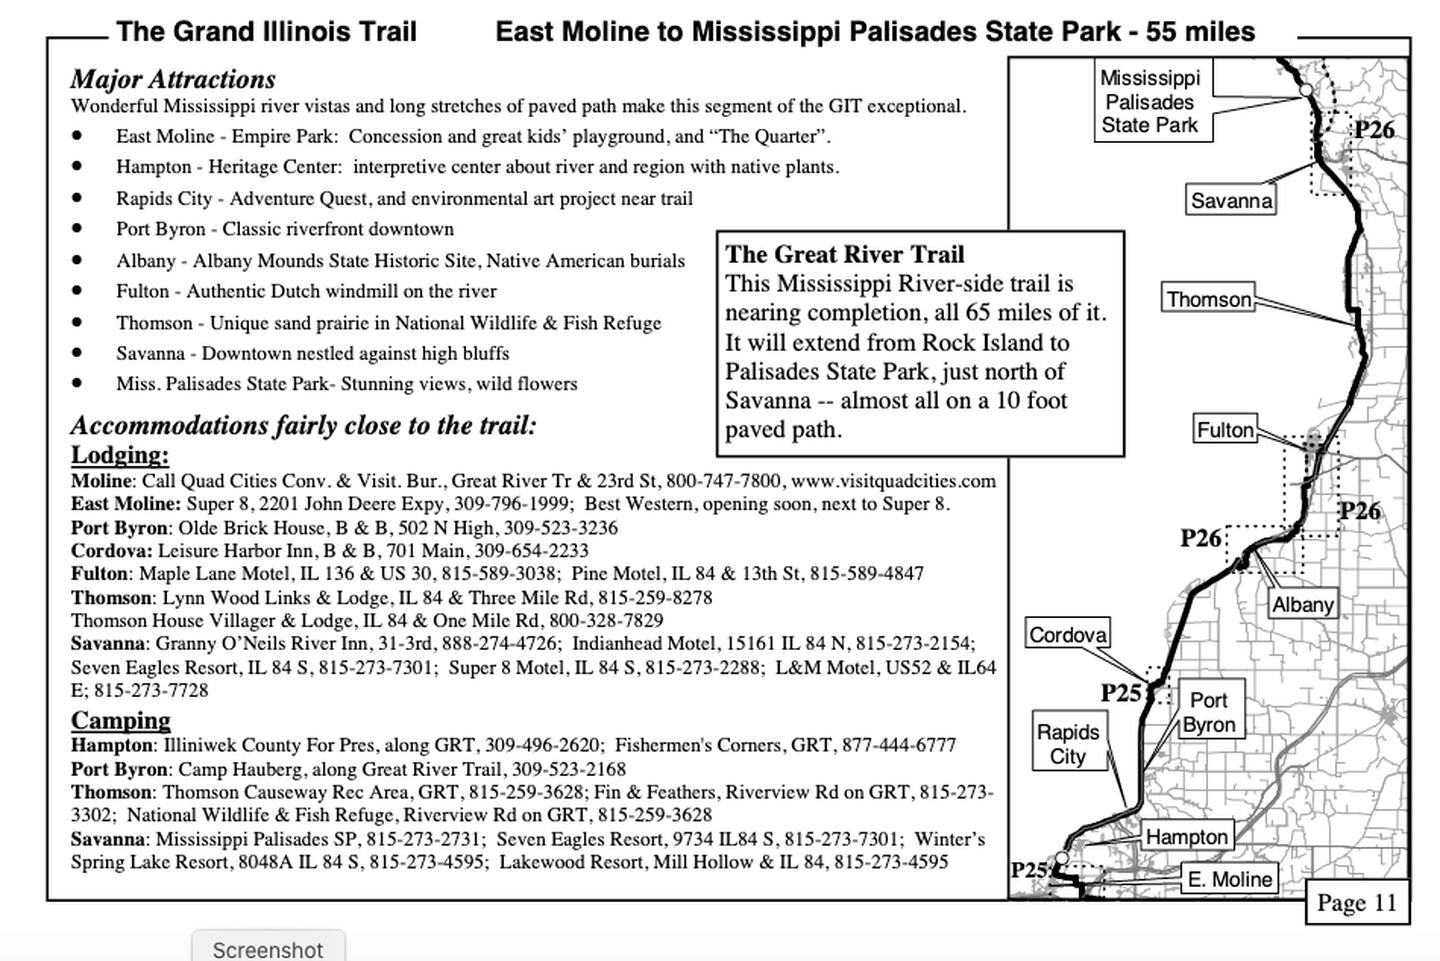 A description of the Great River Trail from the Grand Illinois Trail User's Guide from the Illinois Department of Natural Resources.